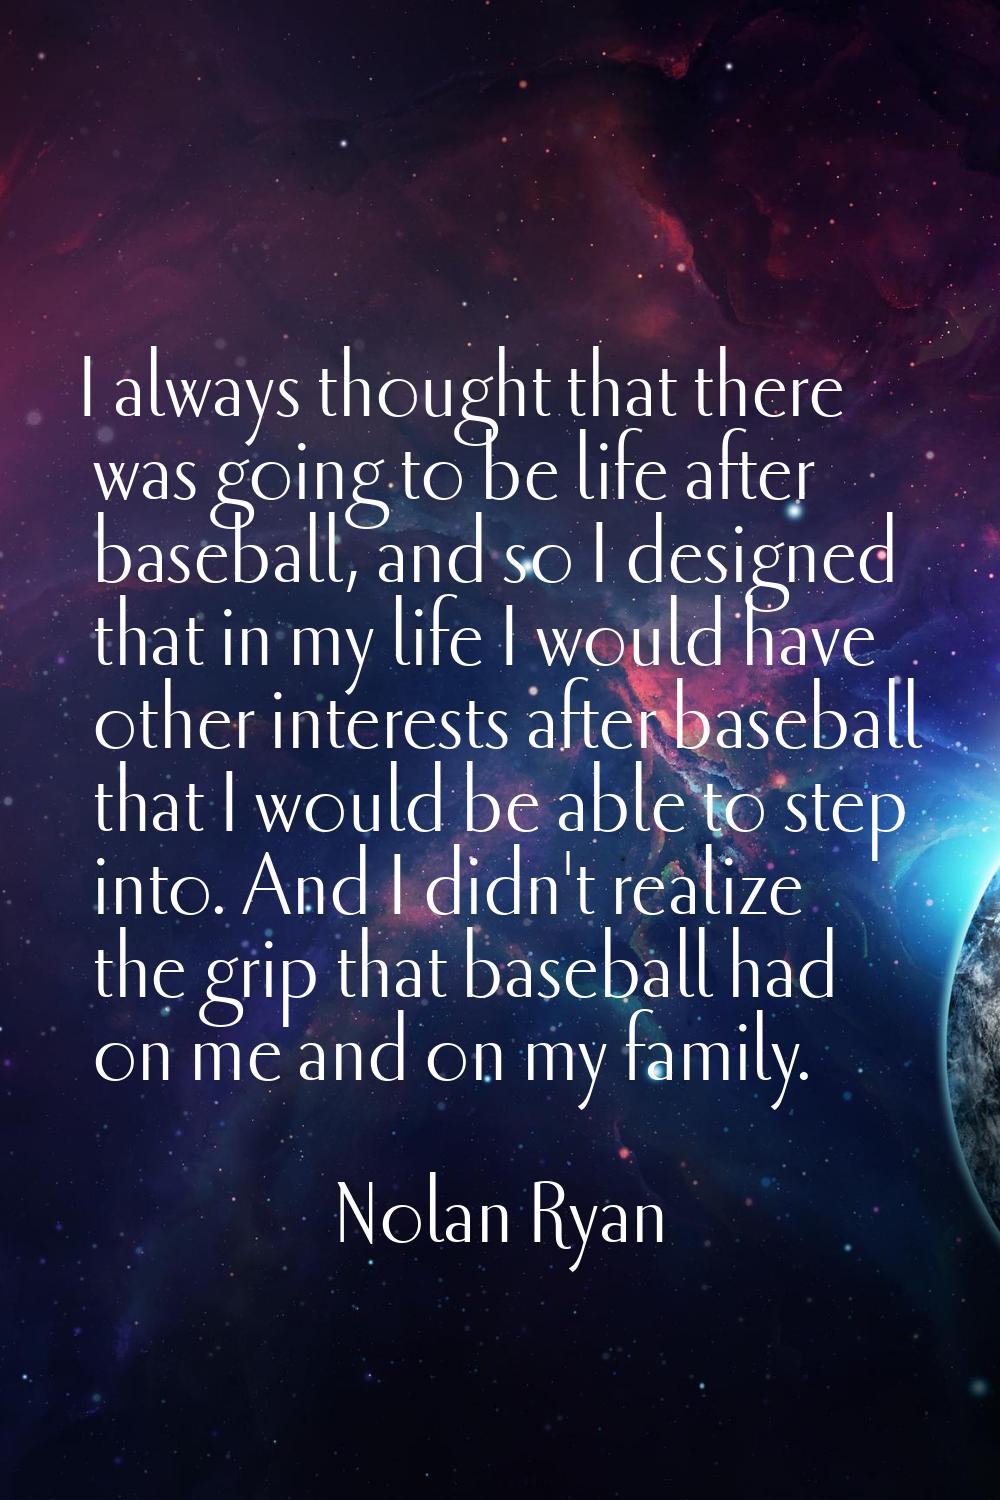 I always thought that there was going to be life after baseball, and so I designed that in my life 